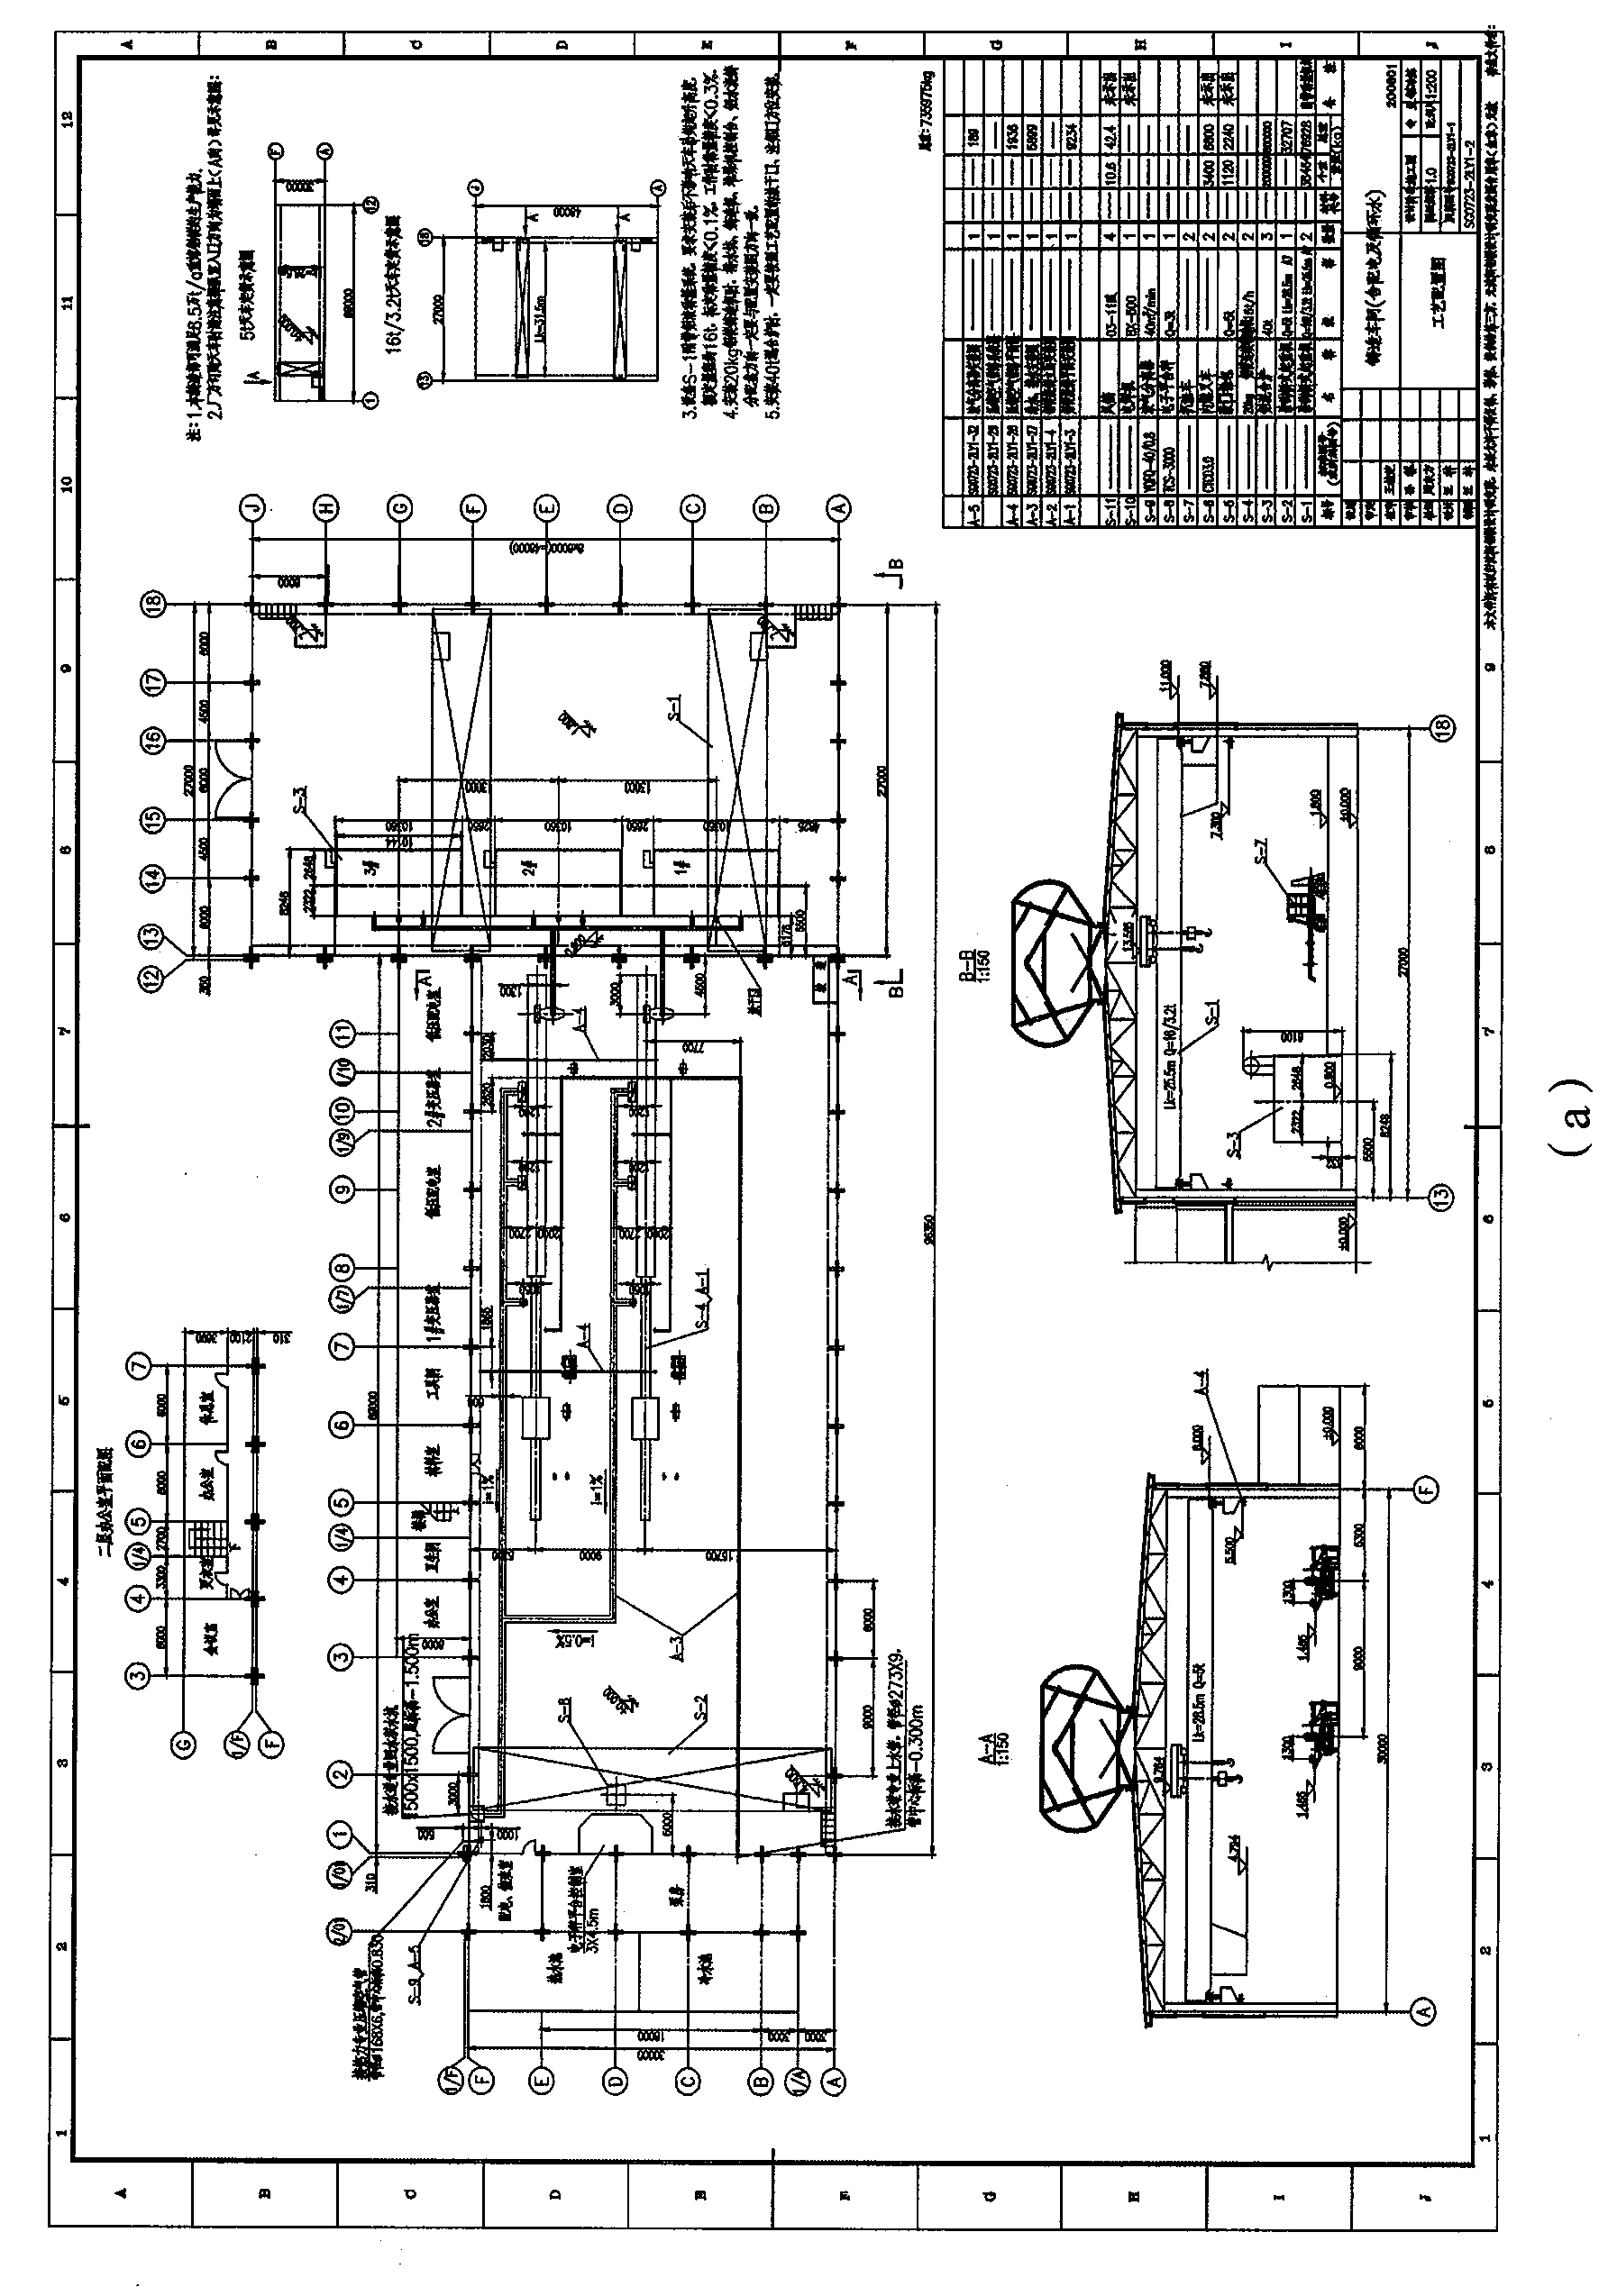 Engineering drawing material information extraction method based on template